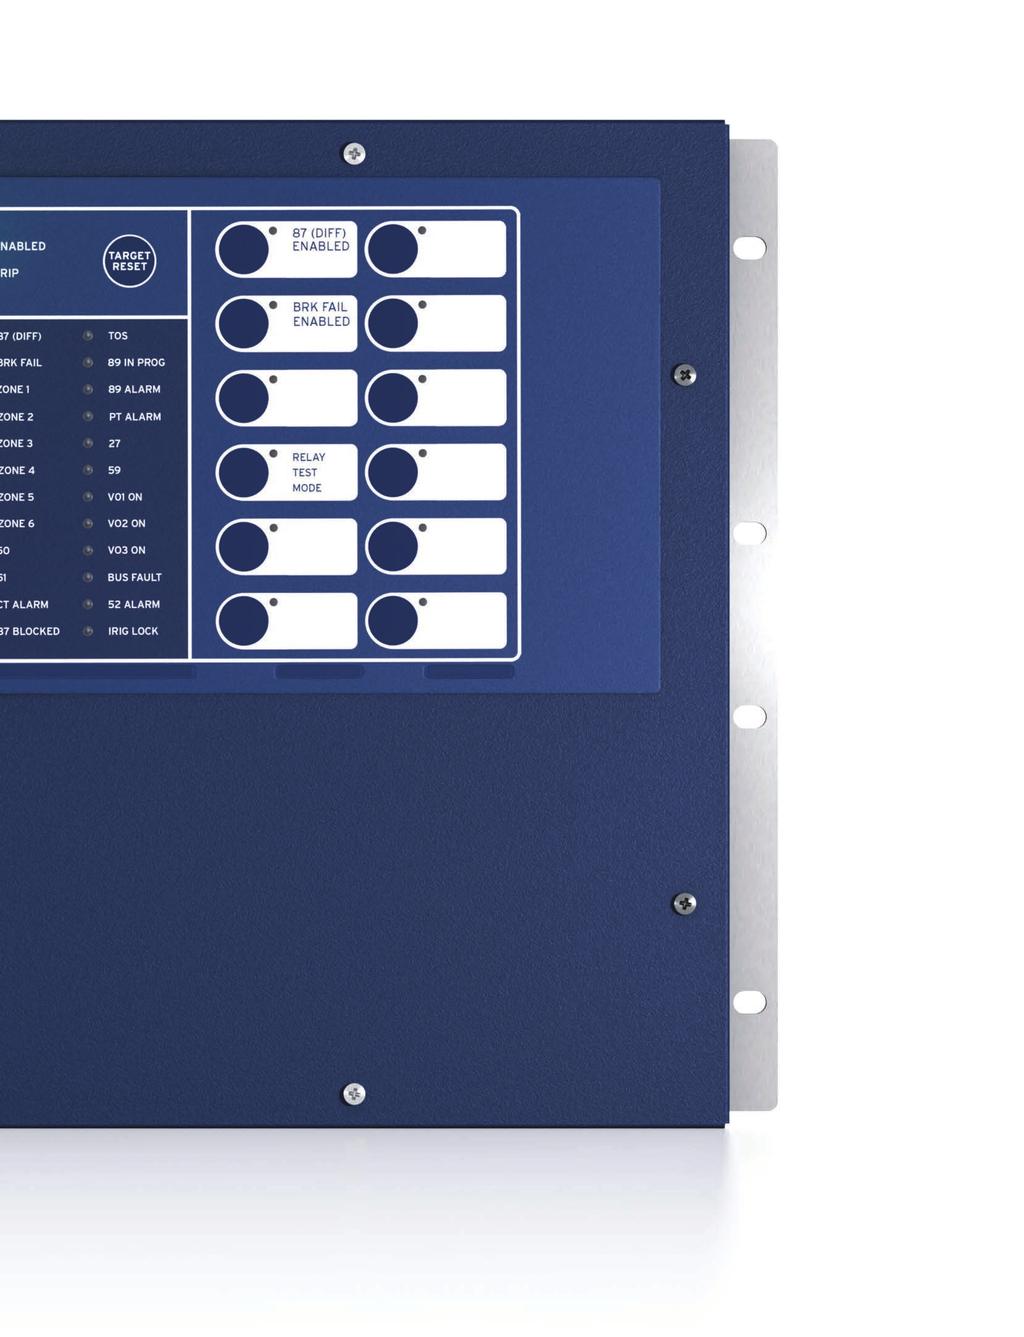 Front-panel LEDs can be programmed to indicate custom alarms and provide fast and simple information to assist dispatchers and line